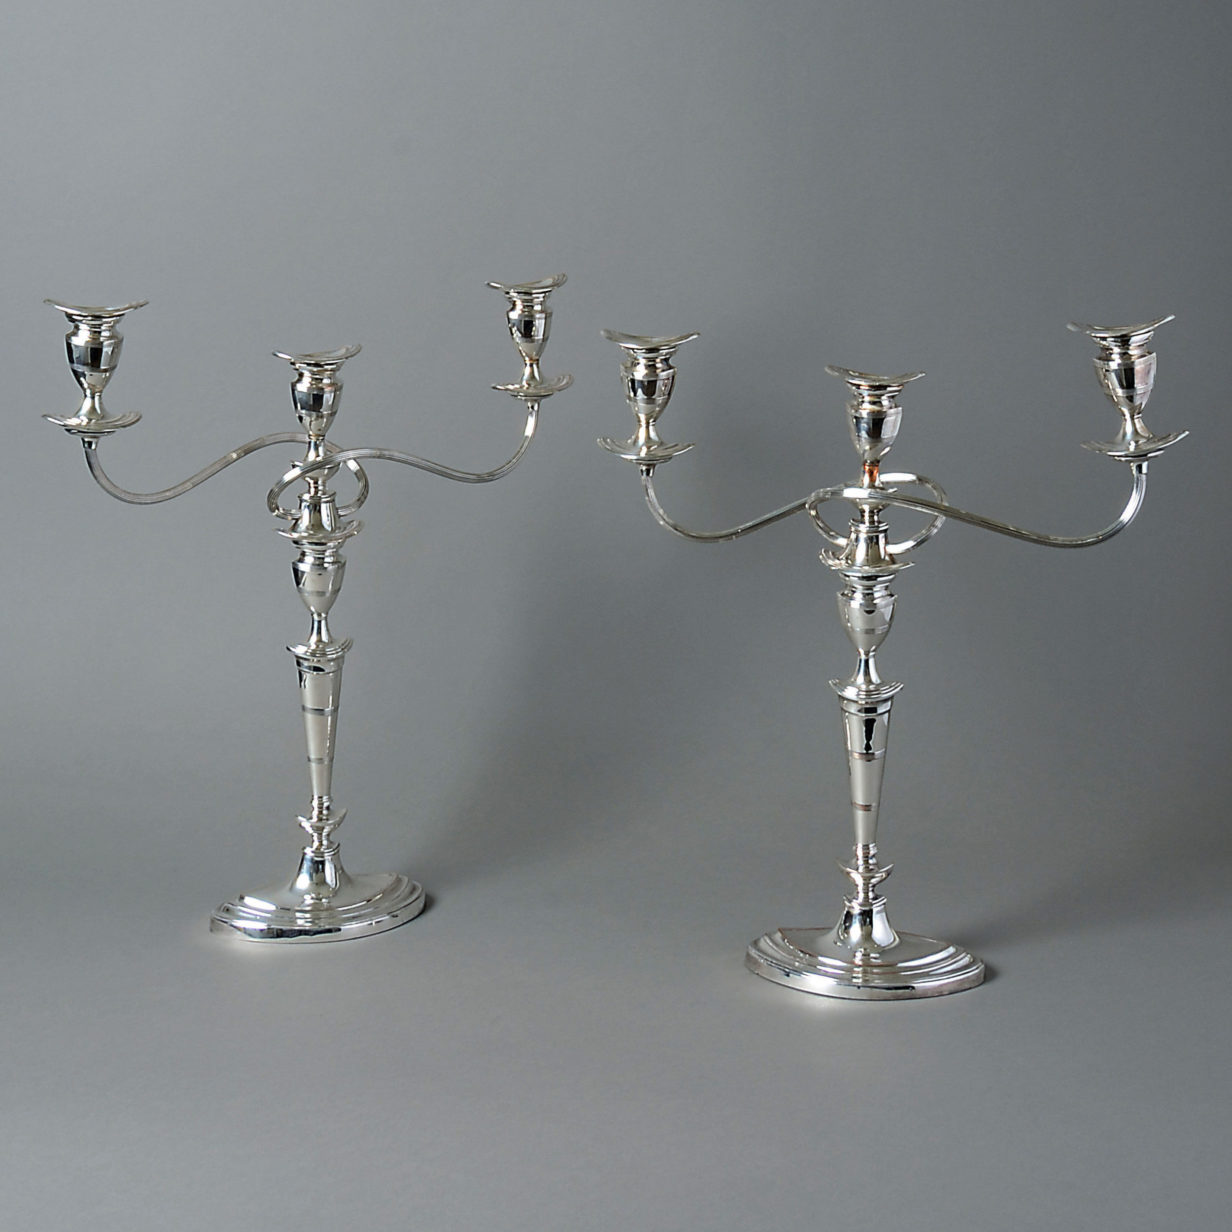 A pair of 18th century sheffield plate candelabra